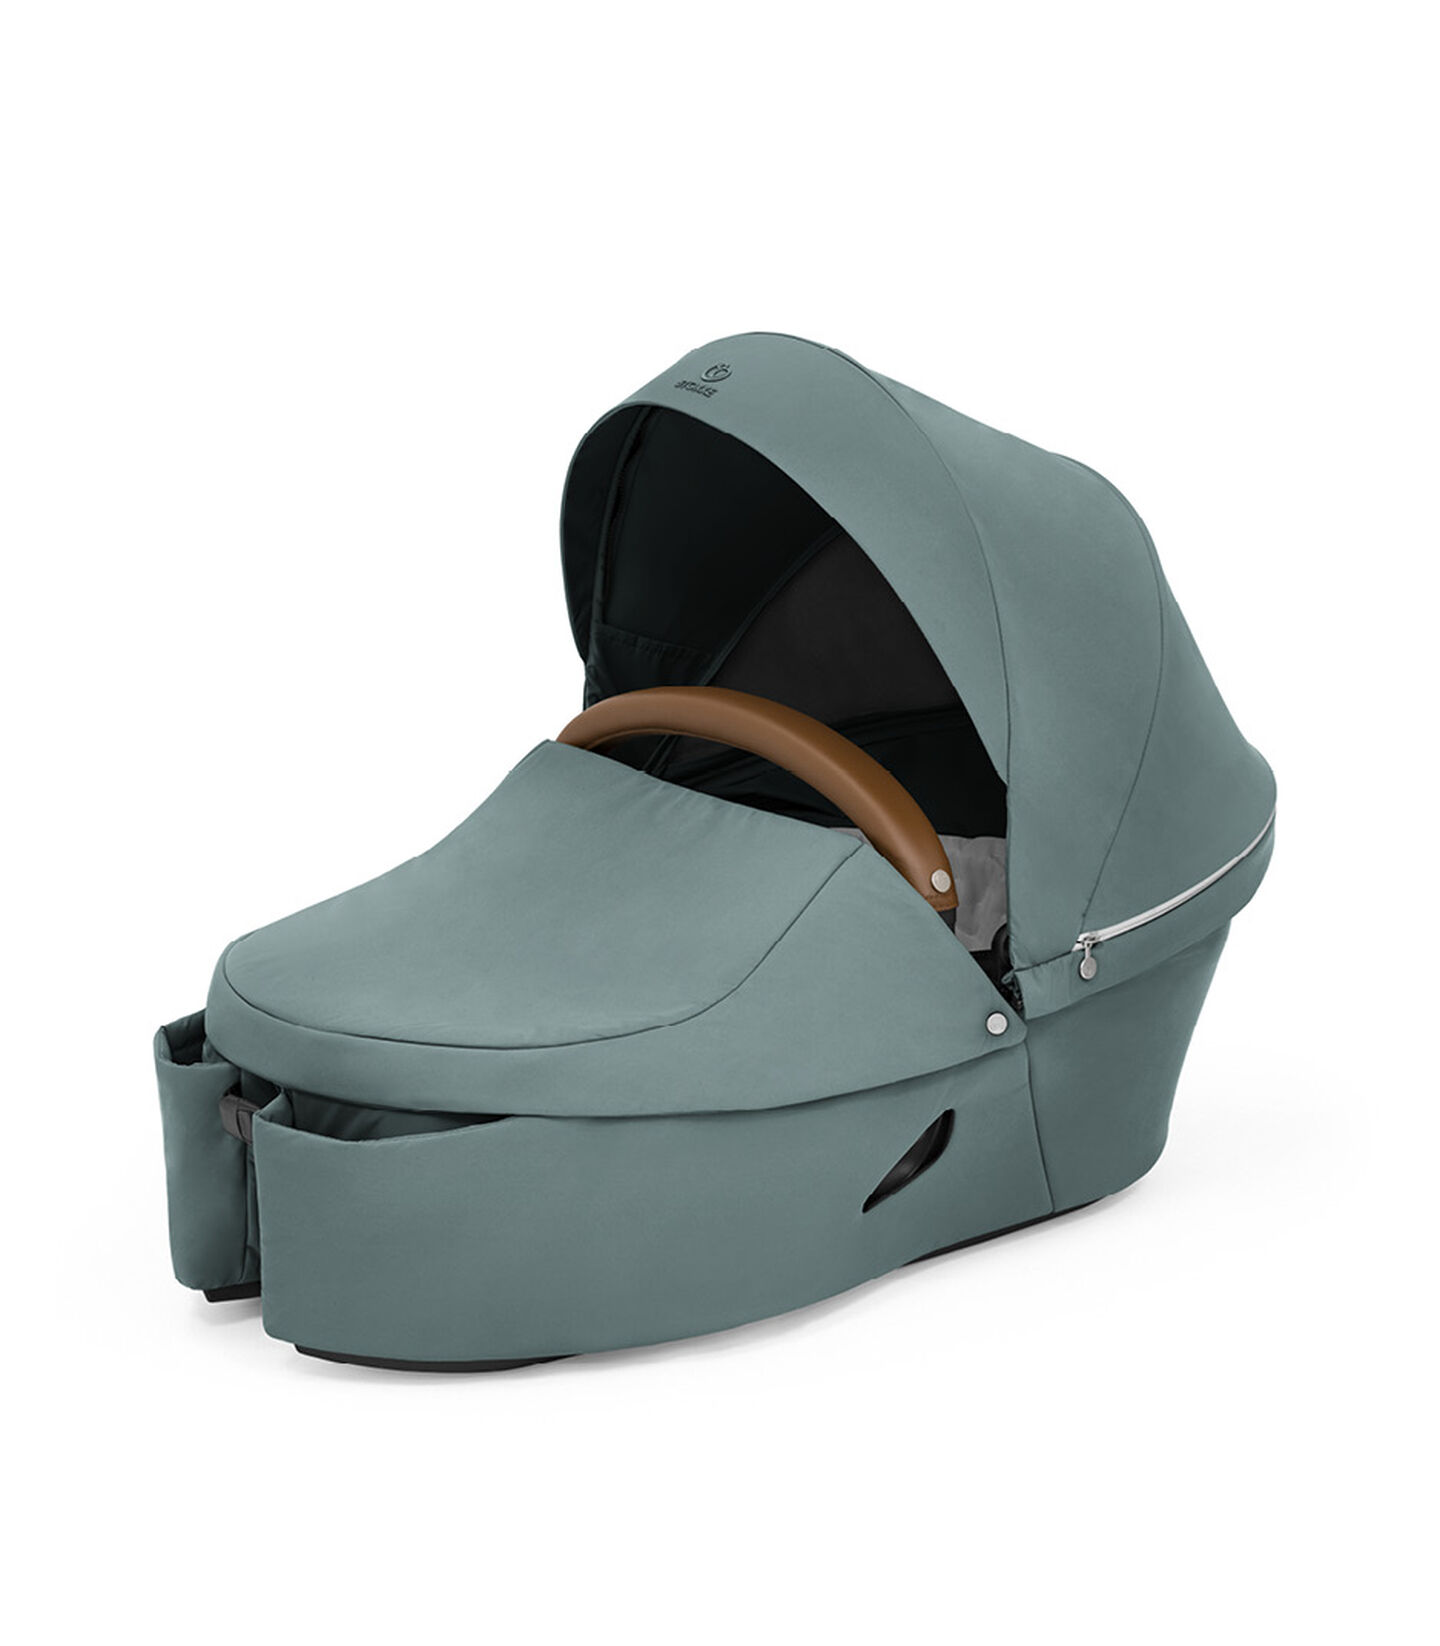 Stokke® Xplory® X Carry Cot Cool Teal, Cool Teal, mainview view 7